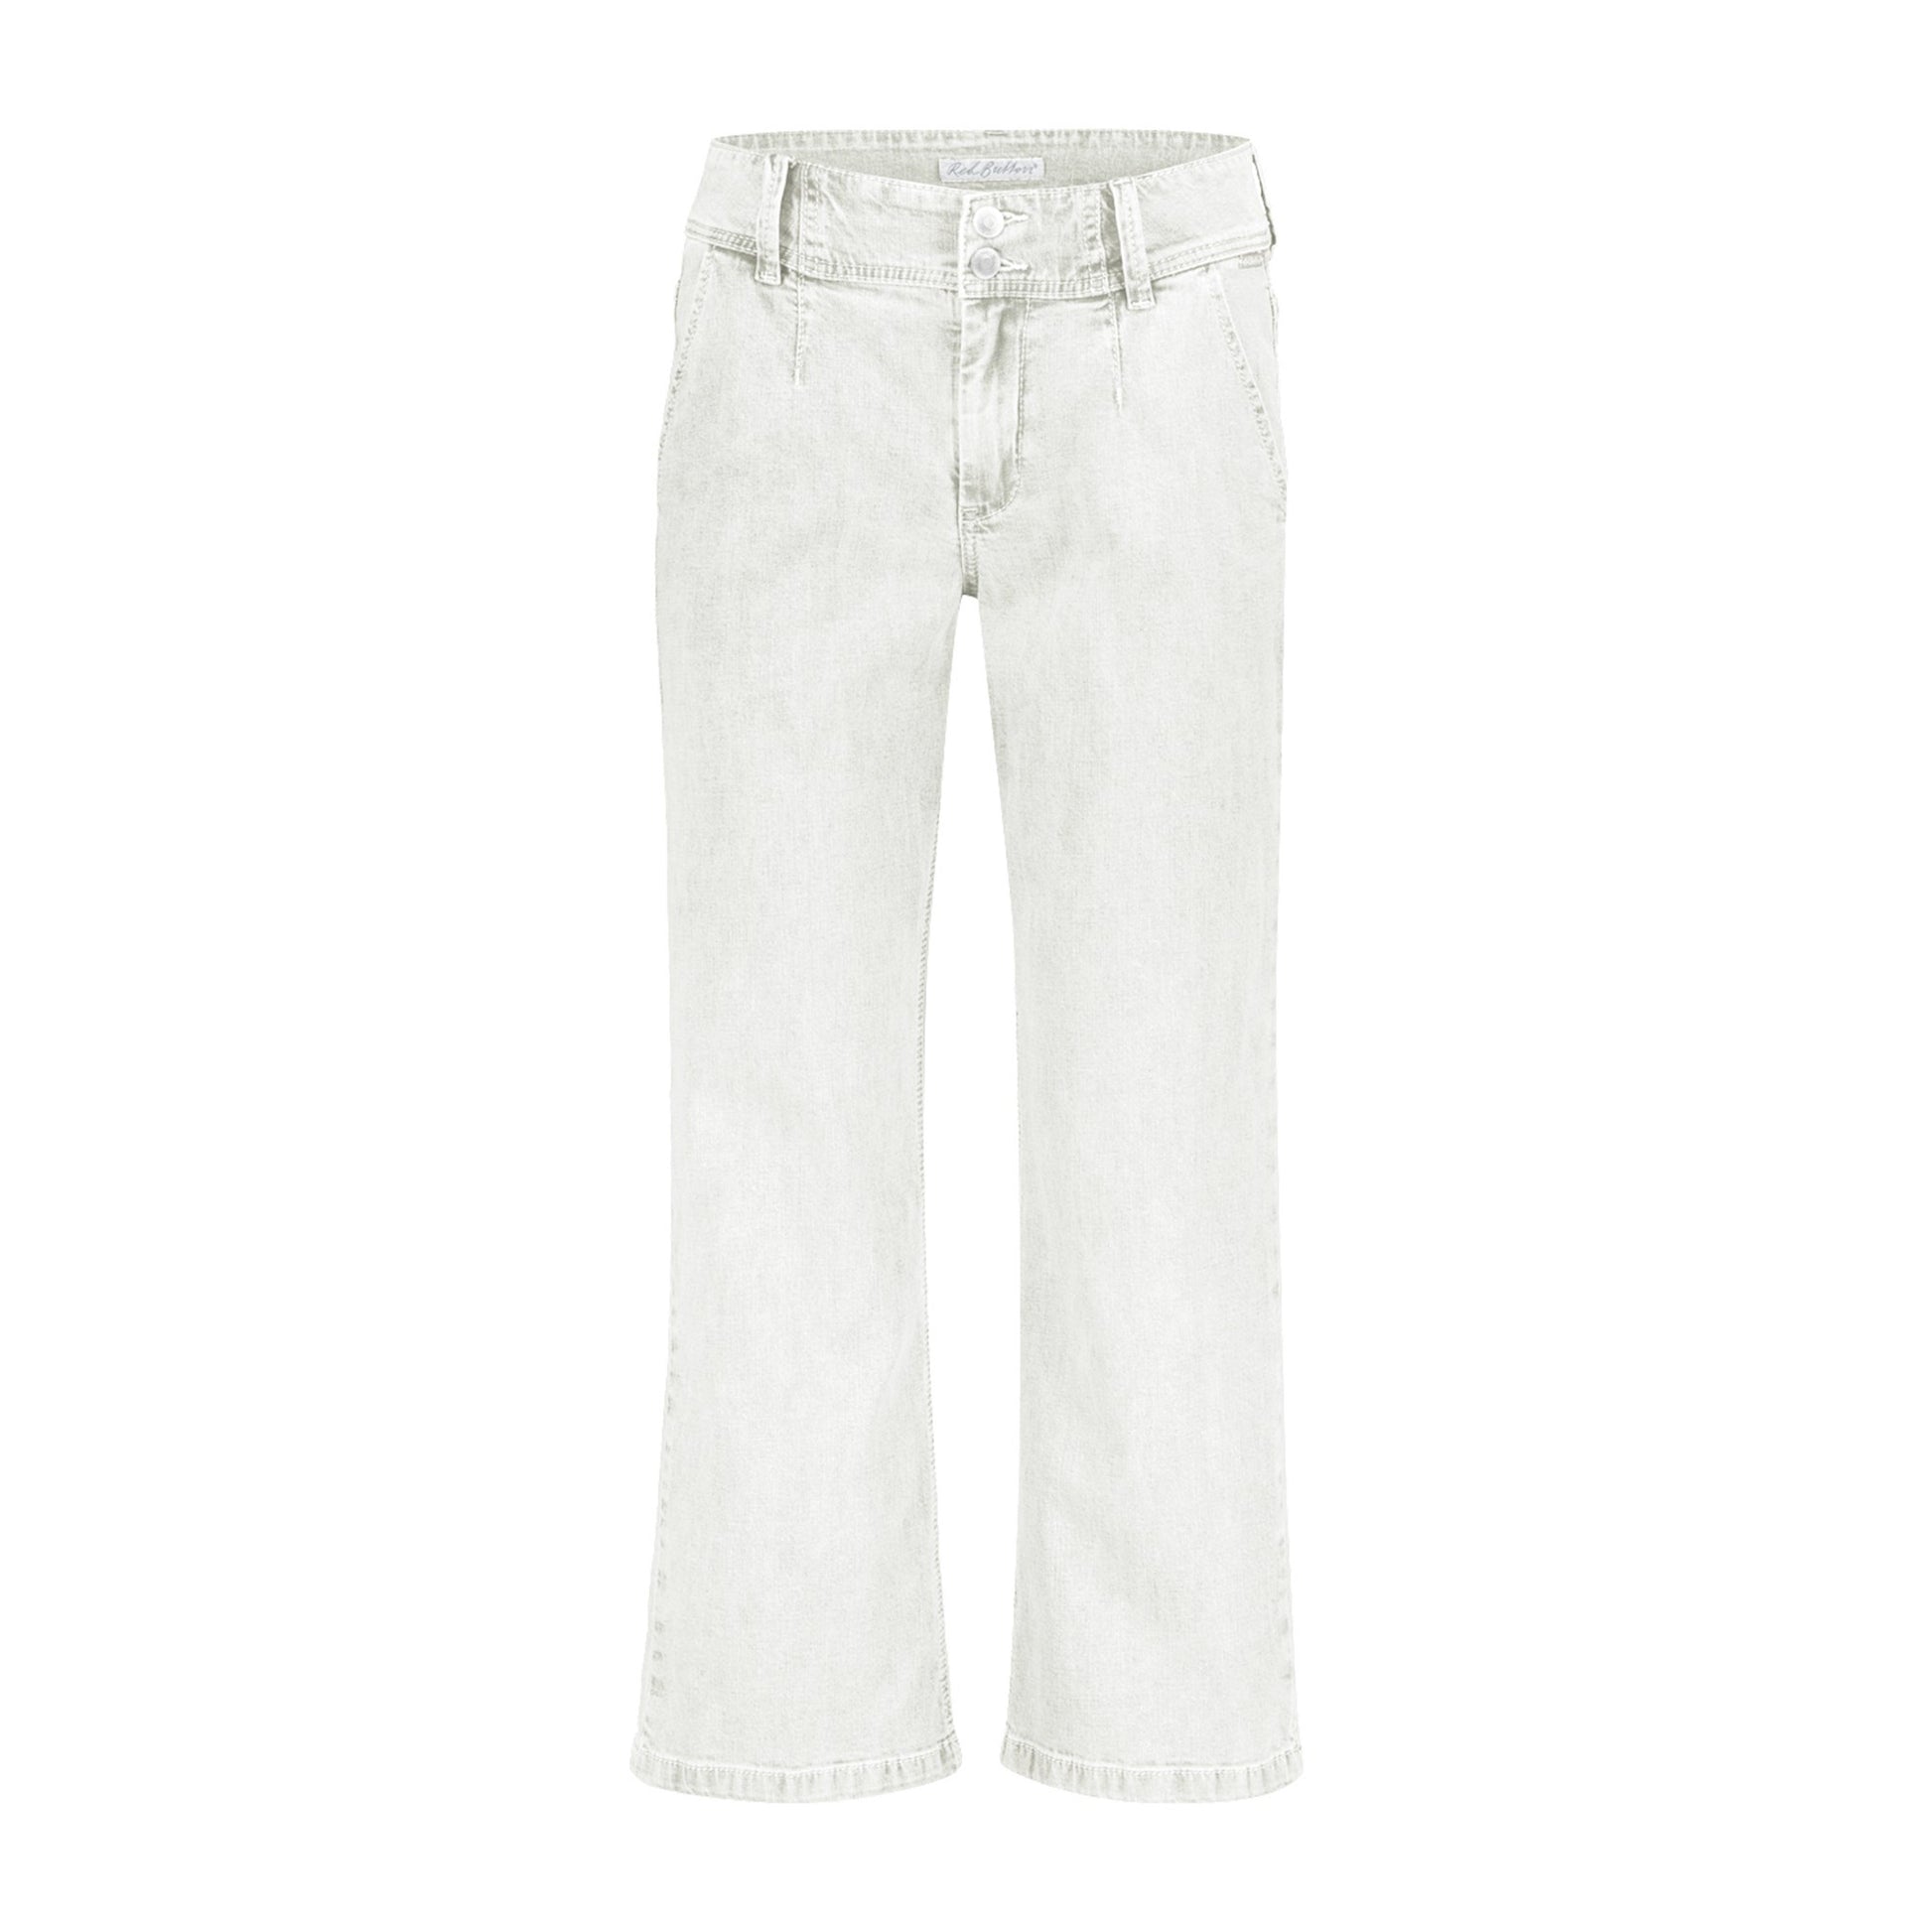 Conker Boutique Red Button Connie Jeans in Off White Front View